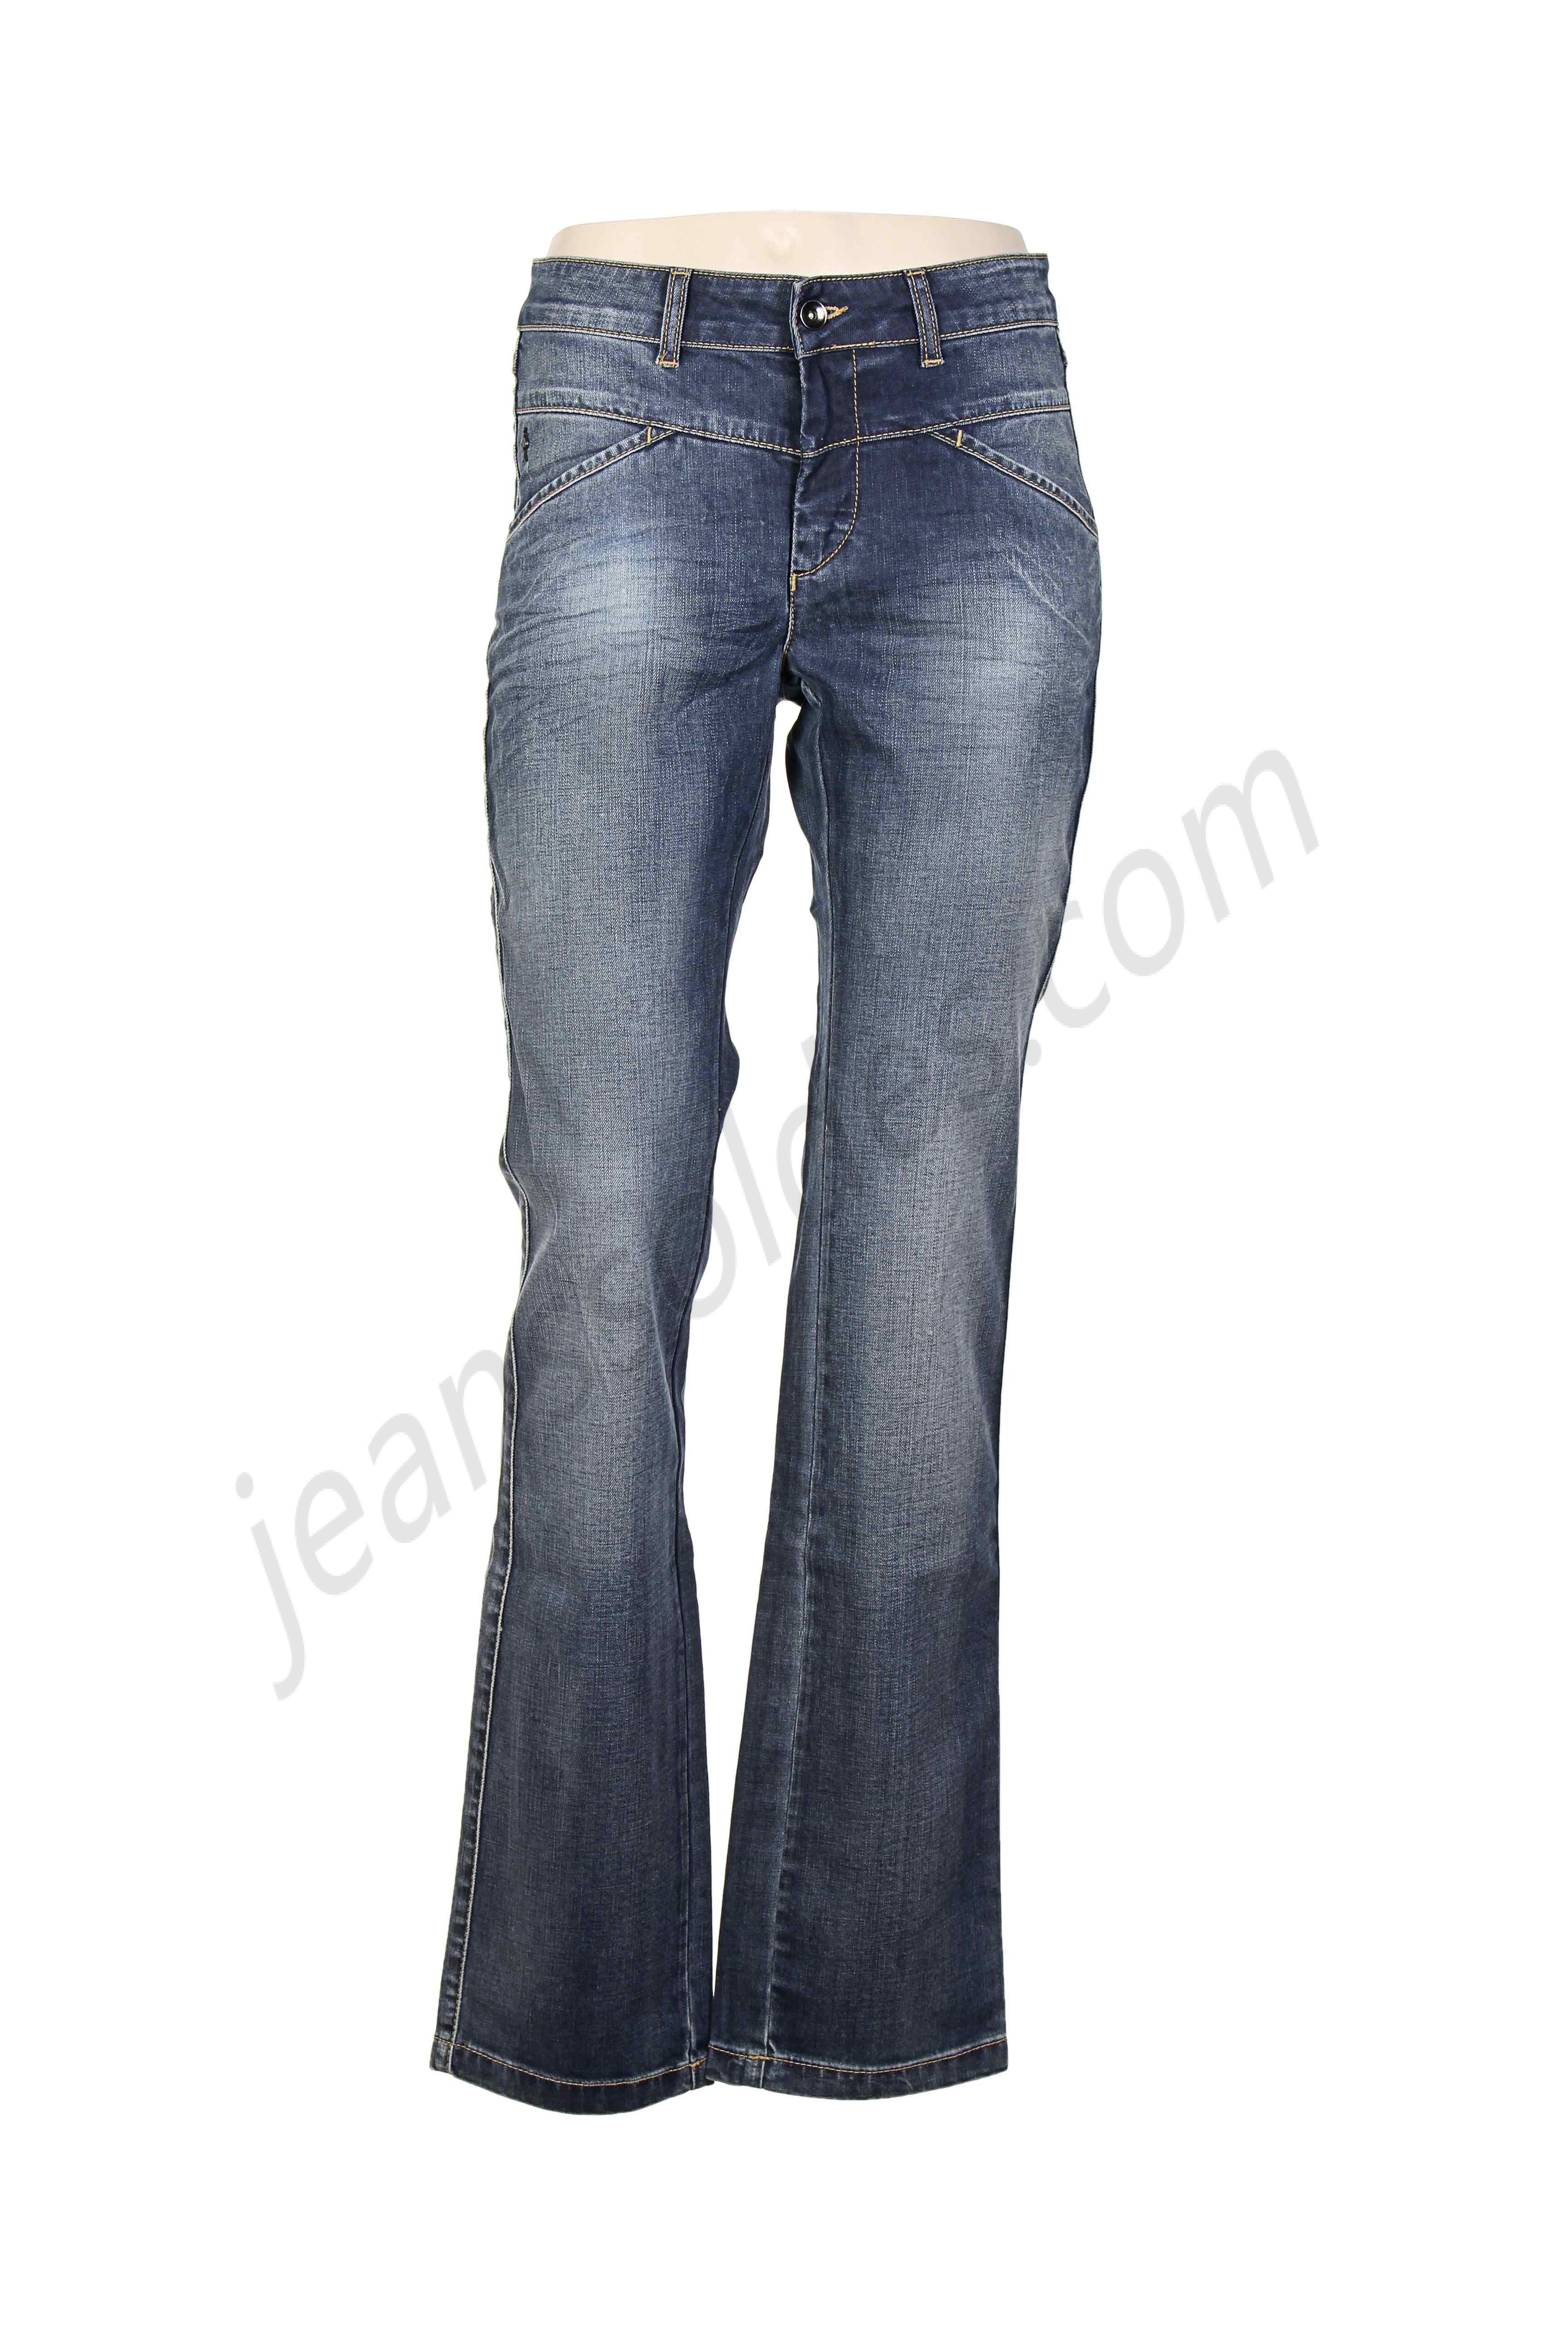 one step-Jeans coupe droite prix d’amis - one step-Jeans coupe droite prix d’amis